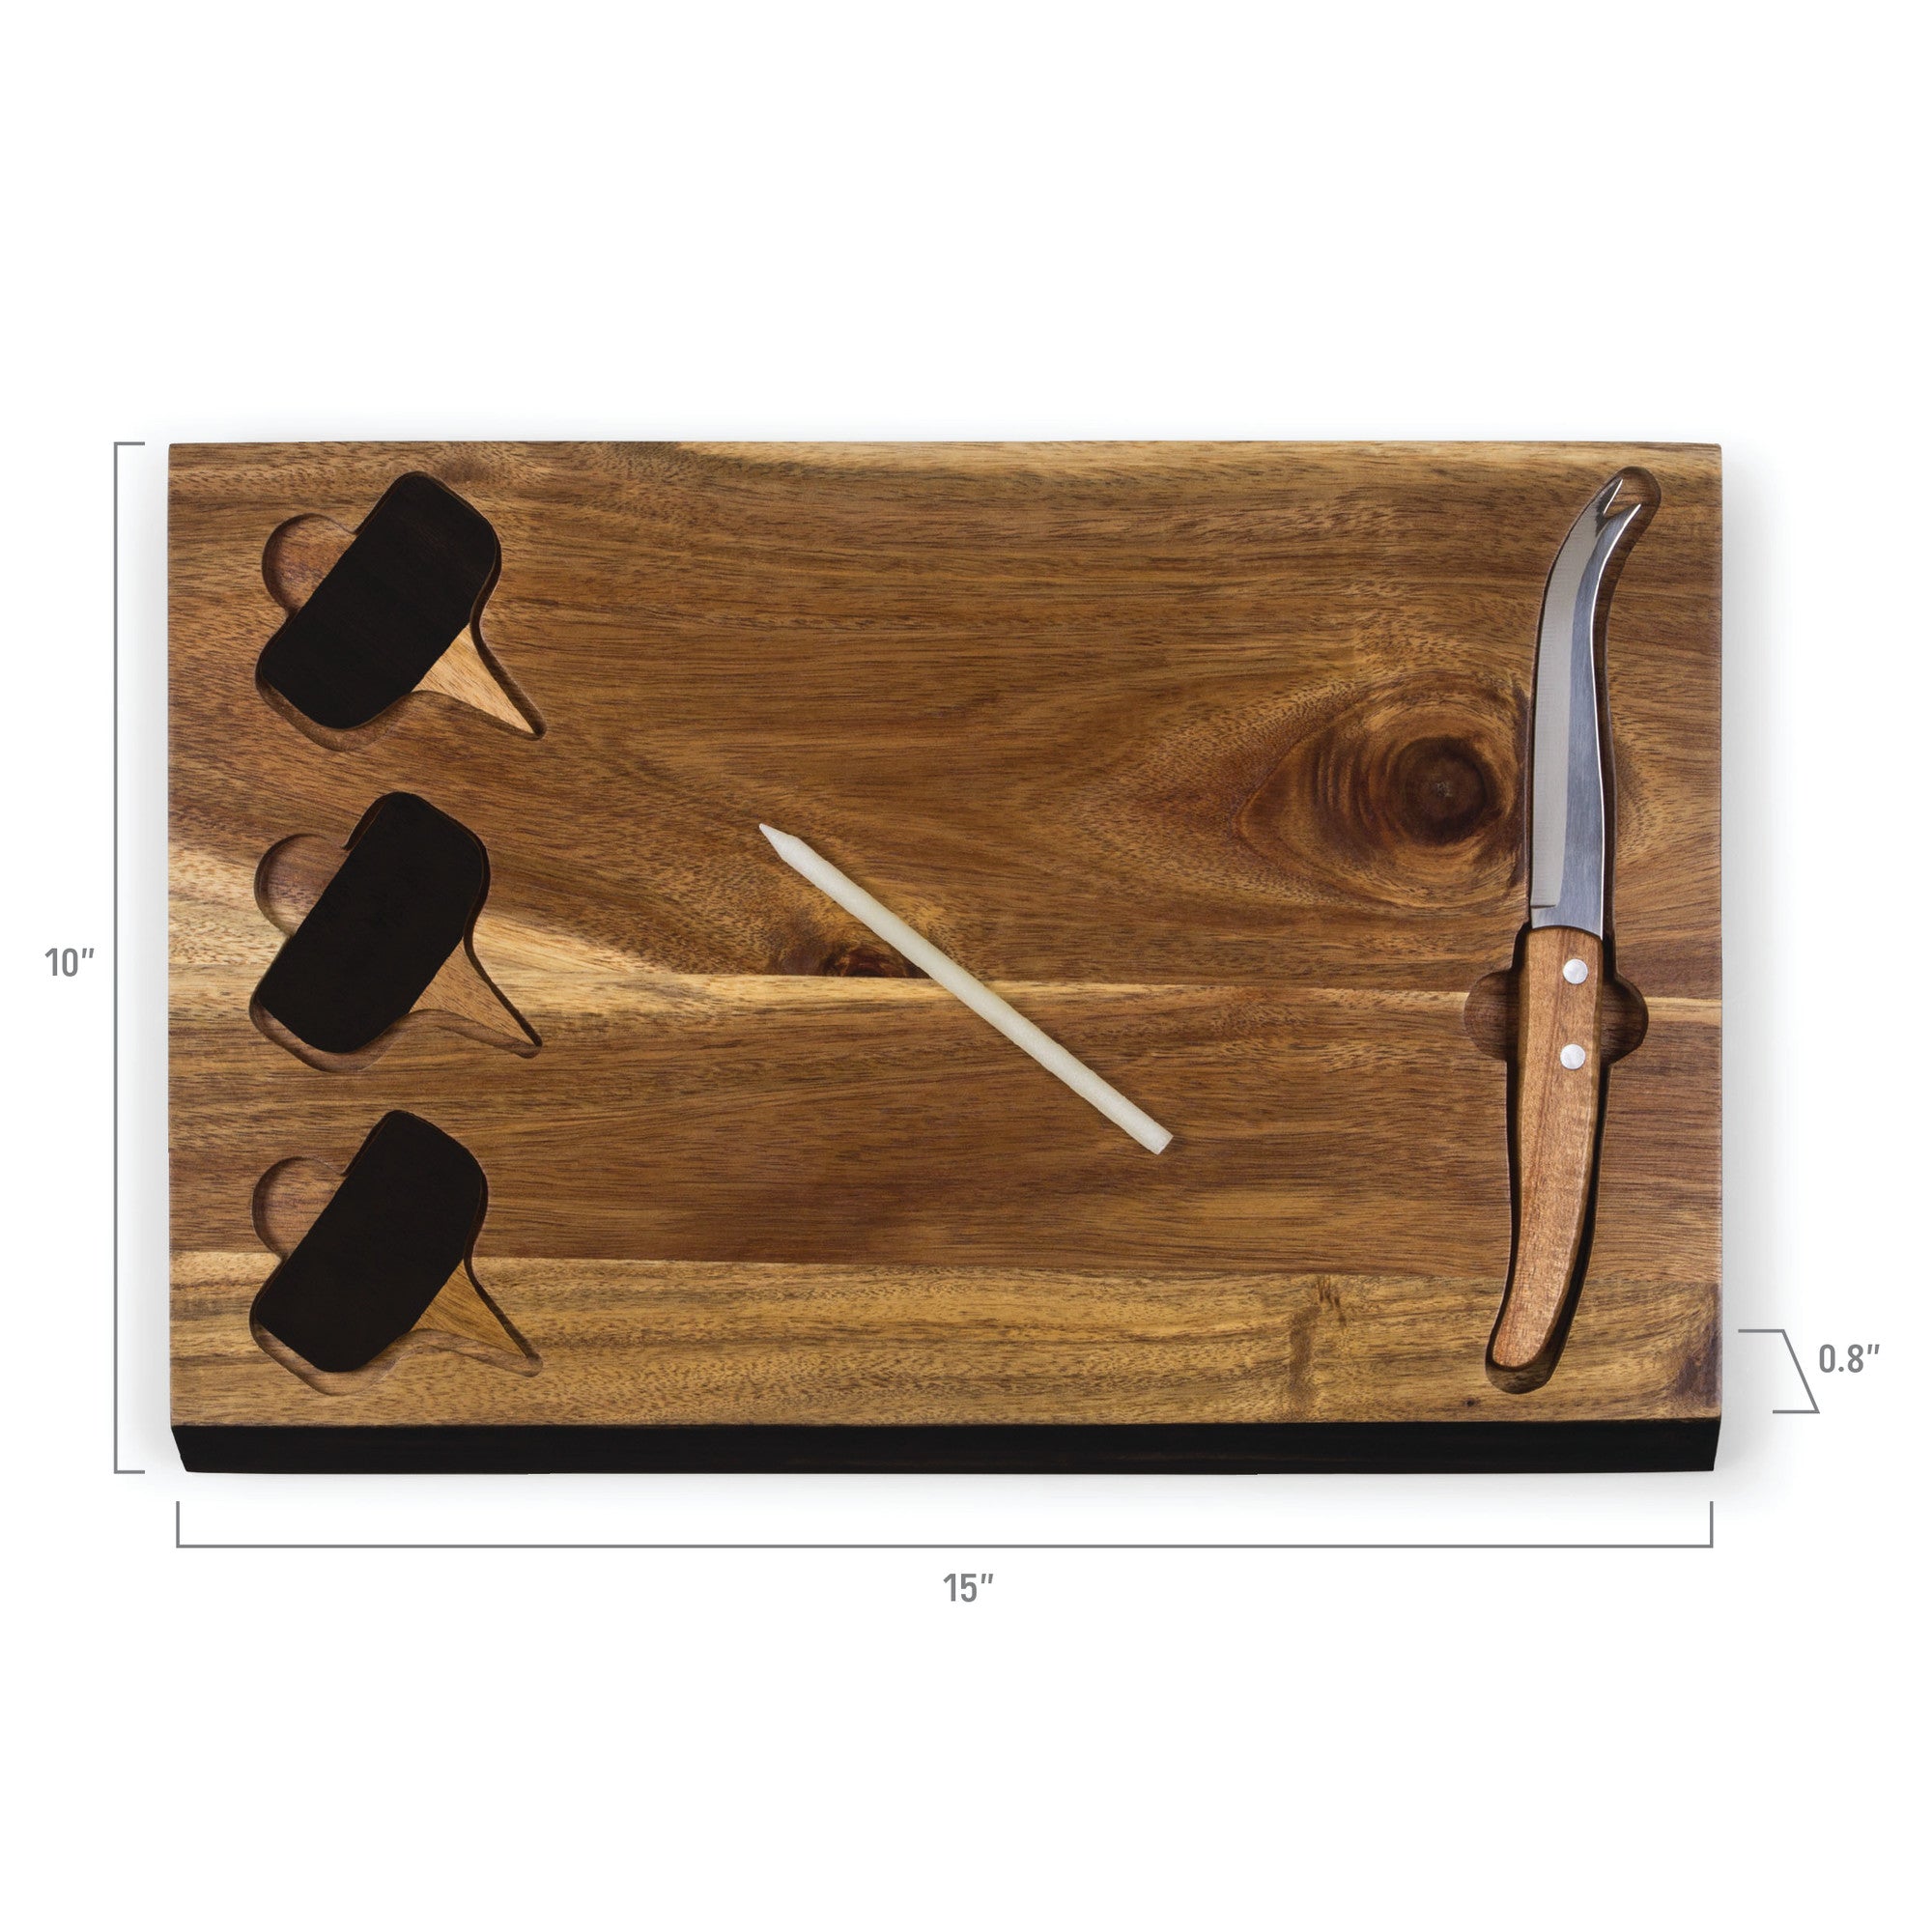 App State Mountaineers - Delio Acacia Cheese Cutting Board & Tools Set